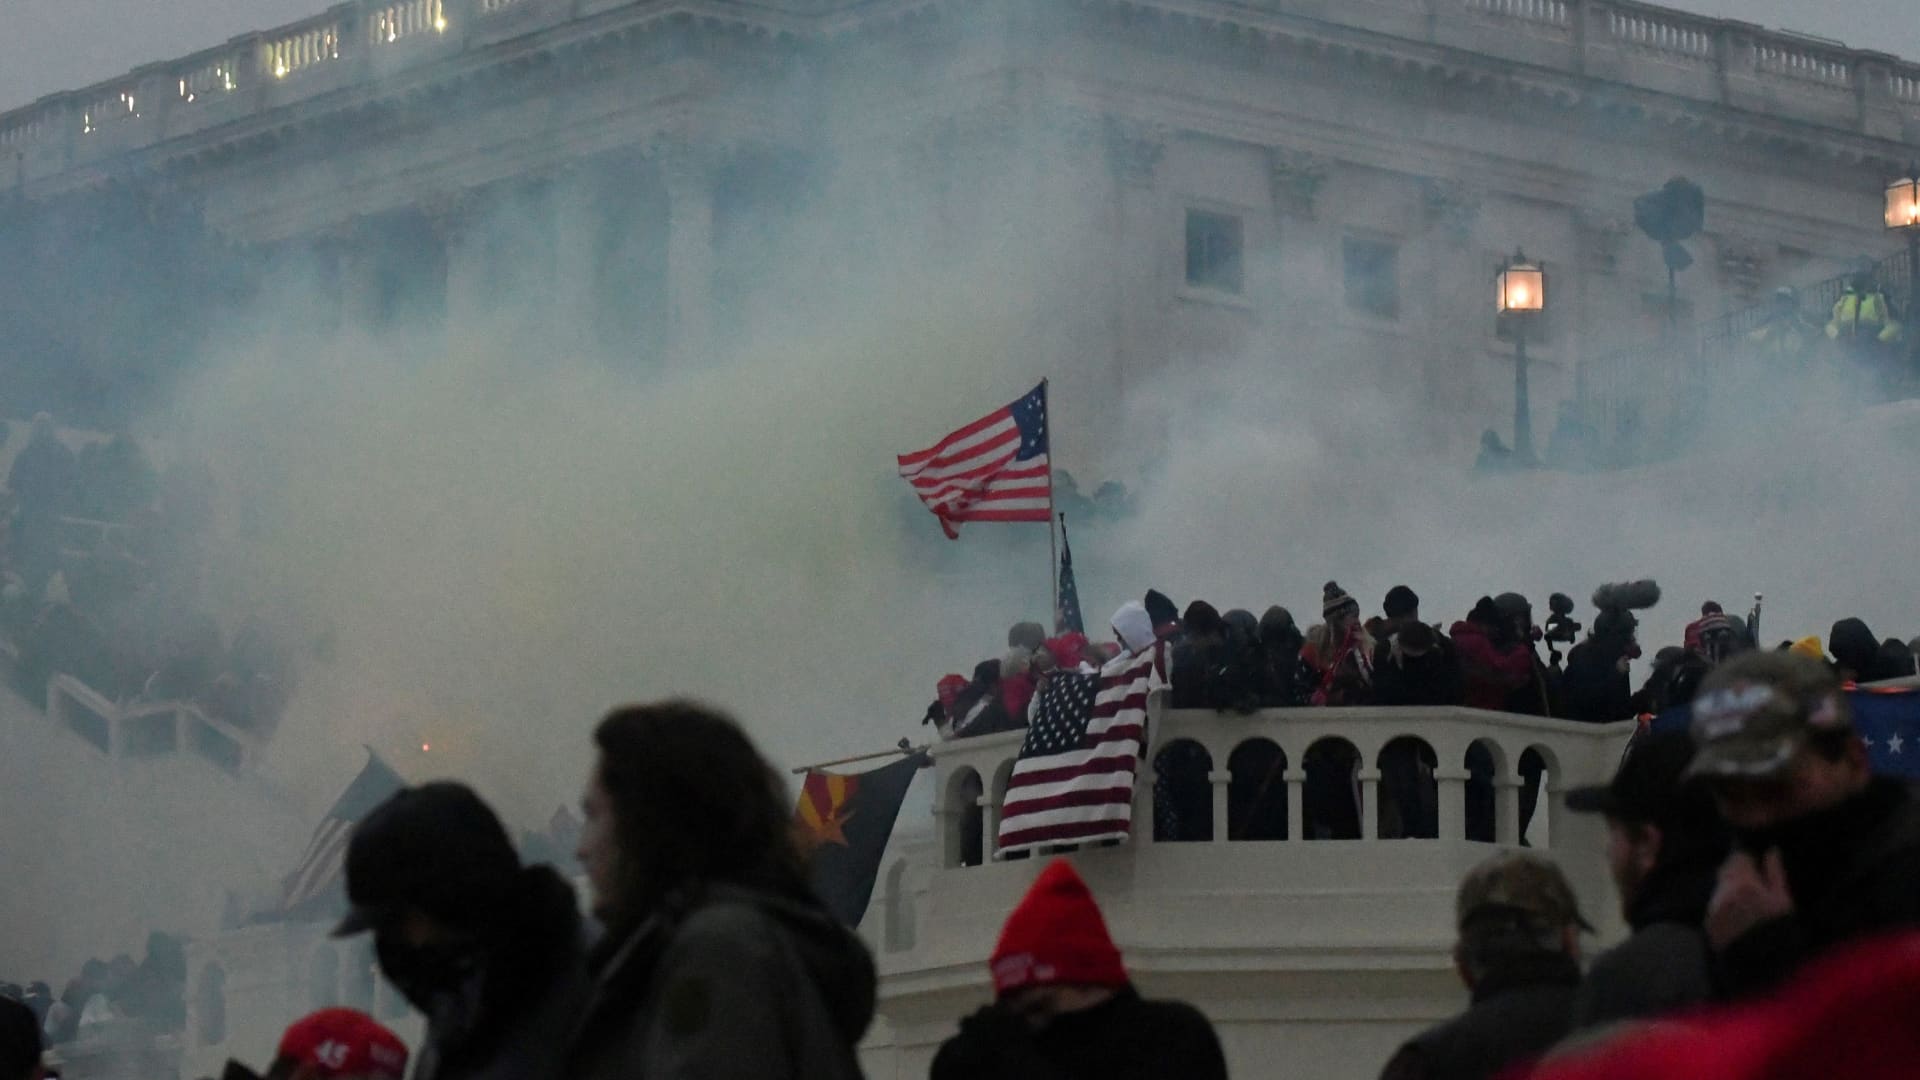 Police clear the U.S. Capitol Building with tear gas as supporters of U.S. President Donald Trump gather outside, in Washington, January 6, 2021.